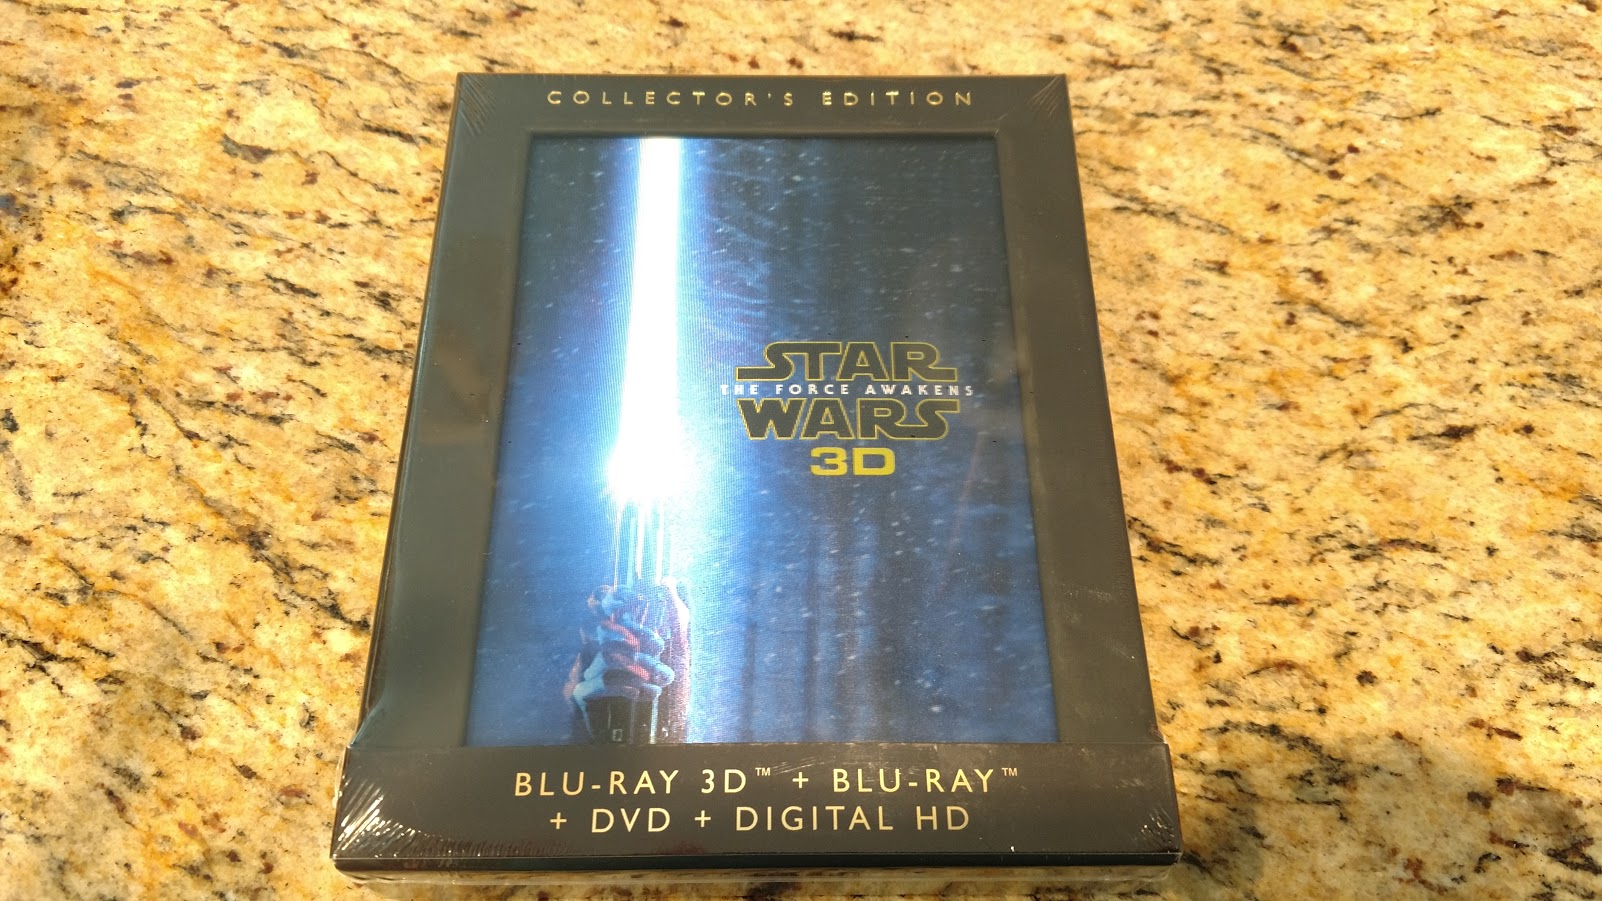 Star Wars: The Force Awakens 3D Review